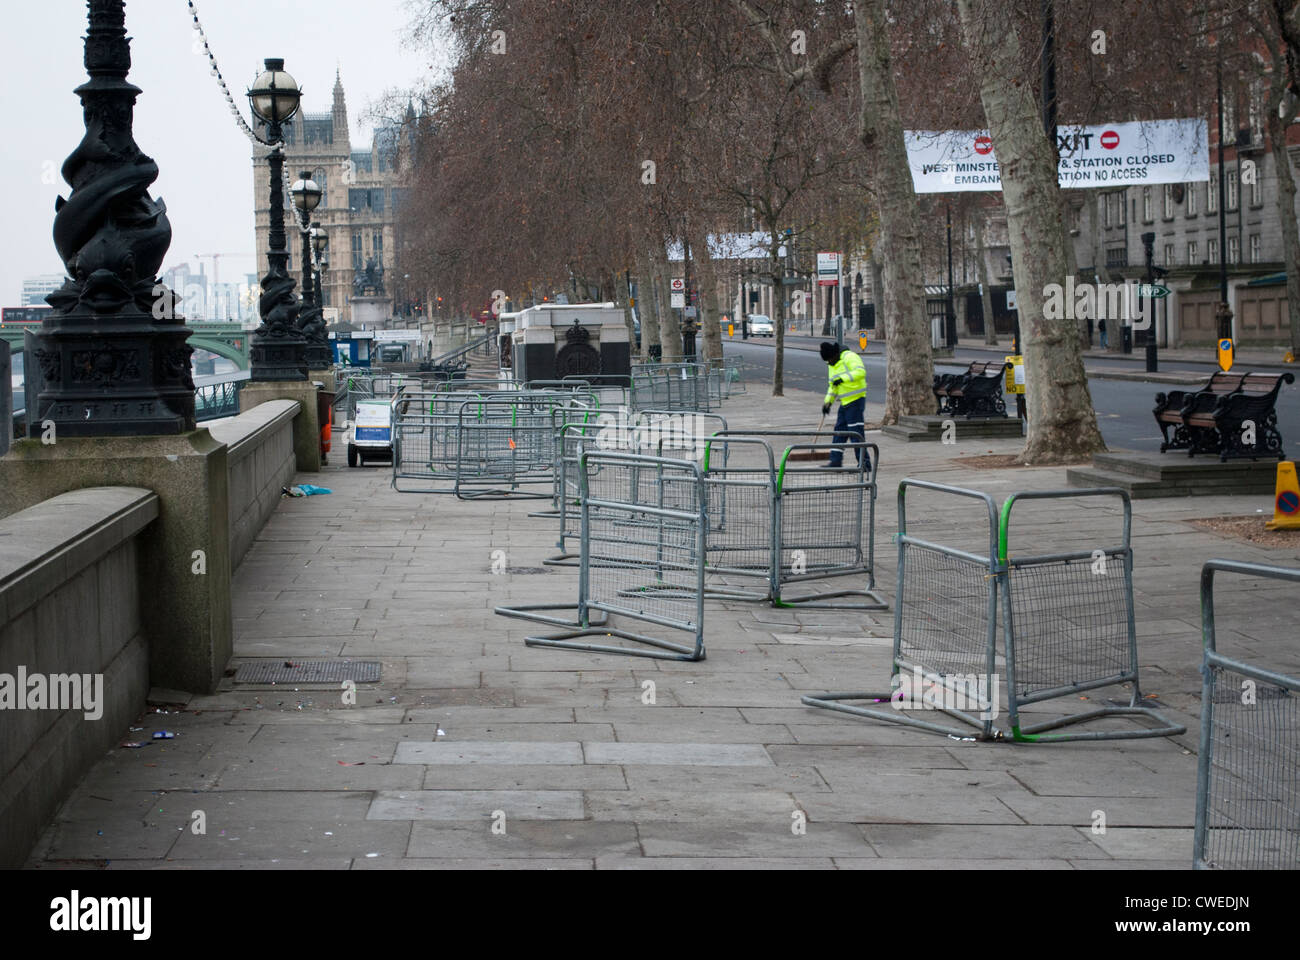 Man in yellow hi-viz jacket clearing away pedestrian barriers on Victoria Embankment on the New Year's Day morning Stock Photo